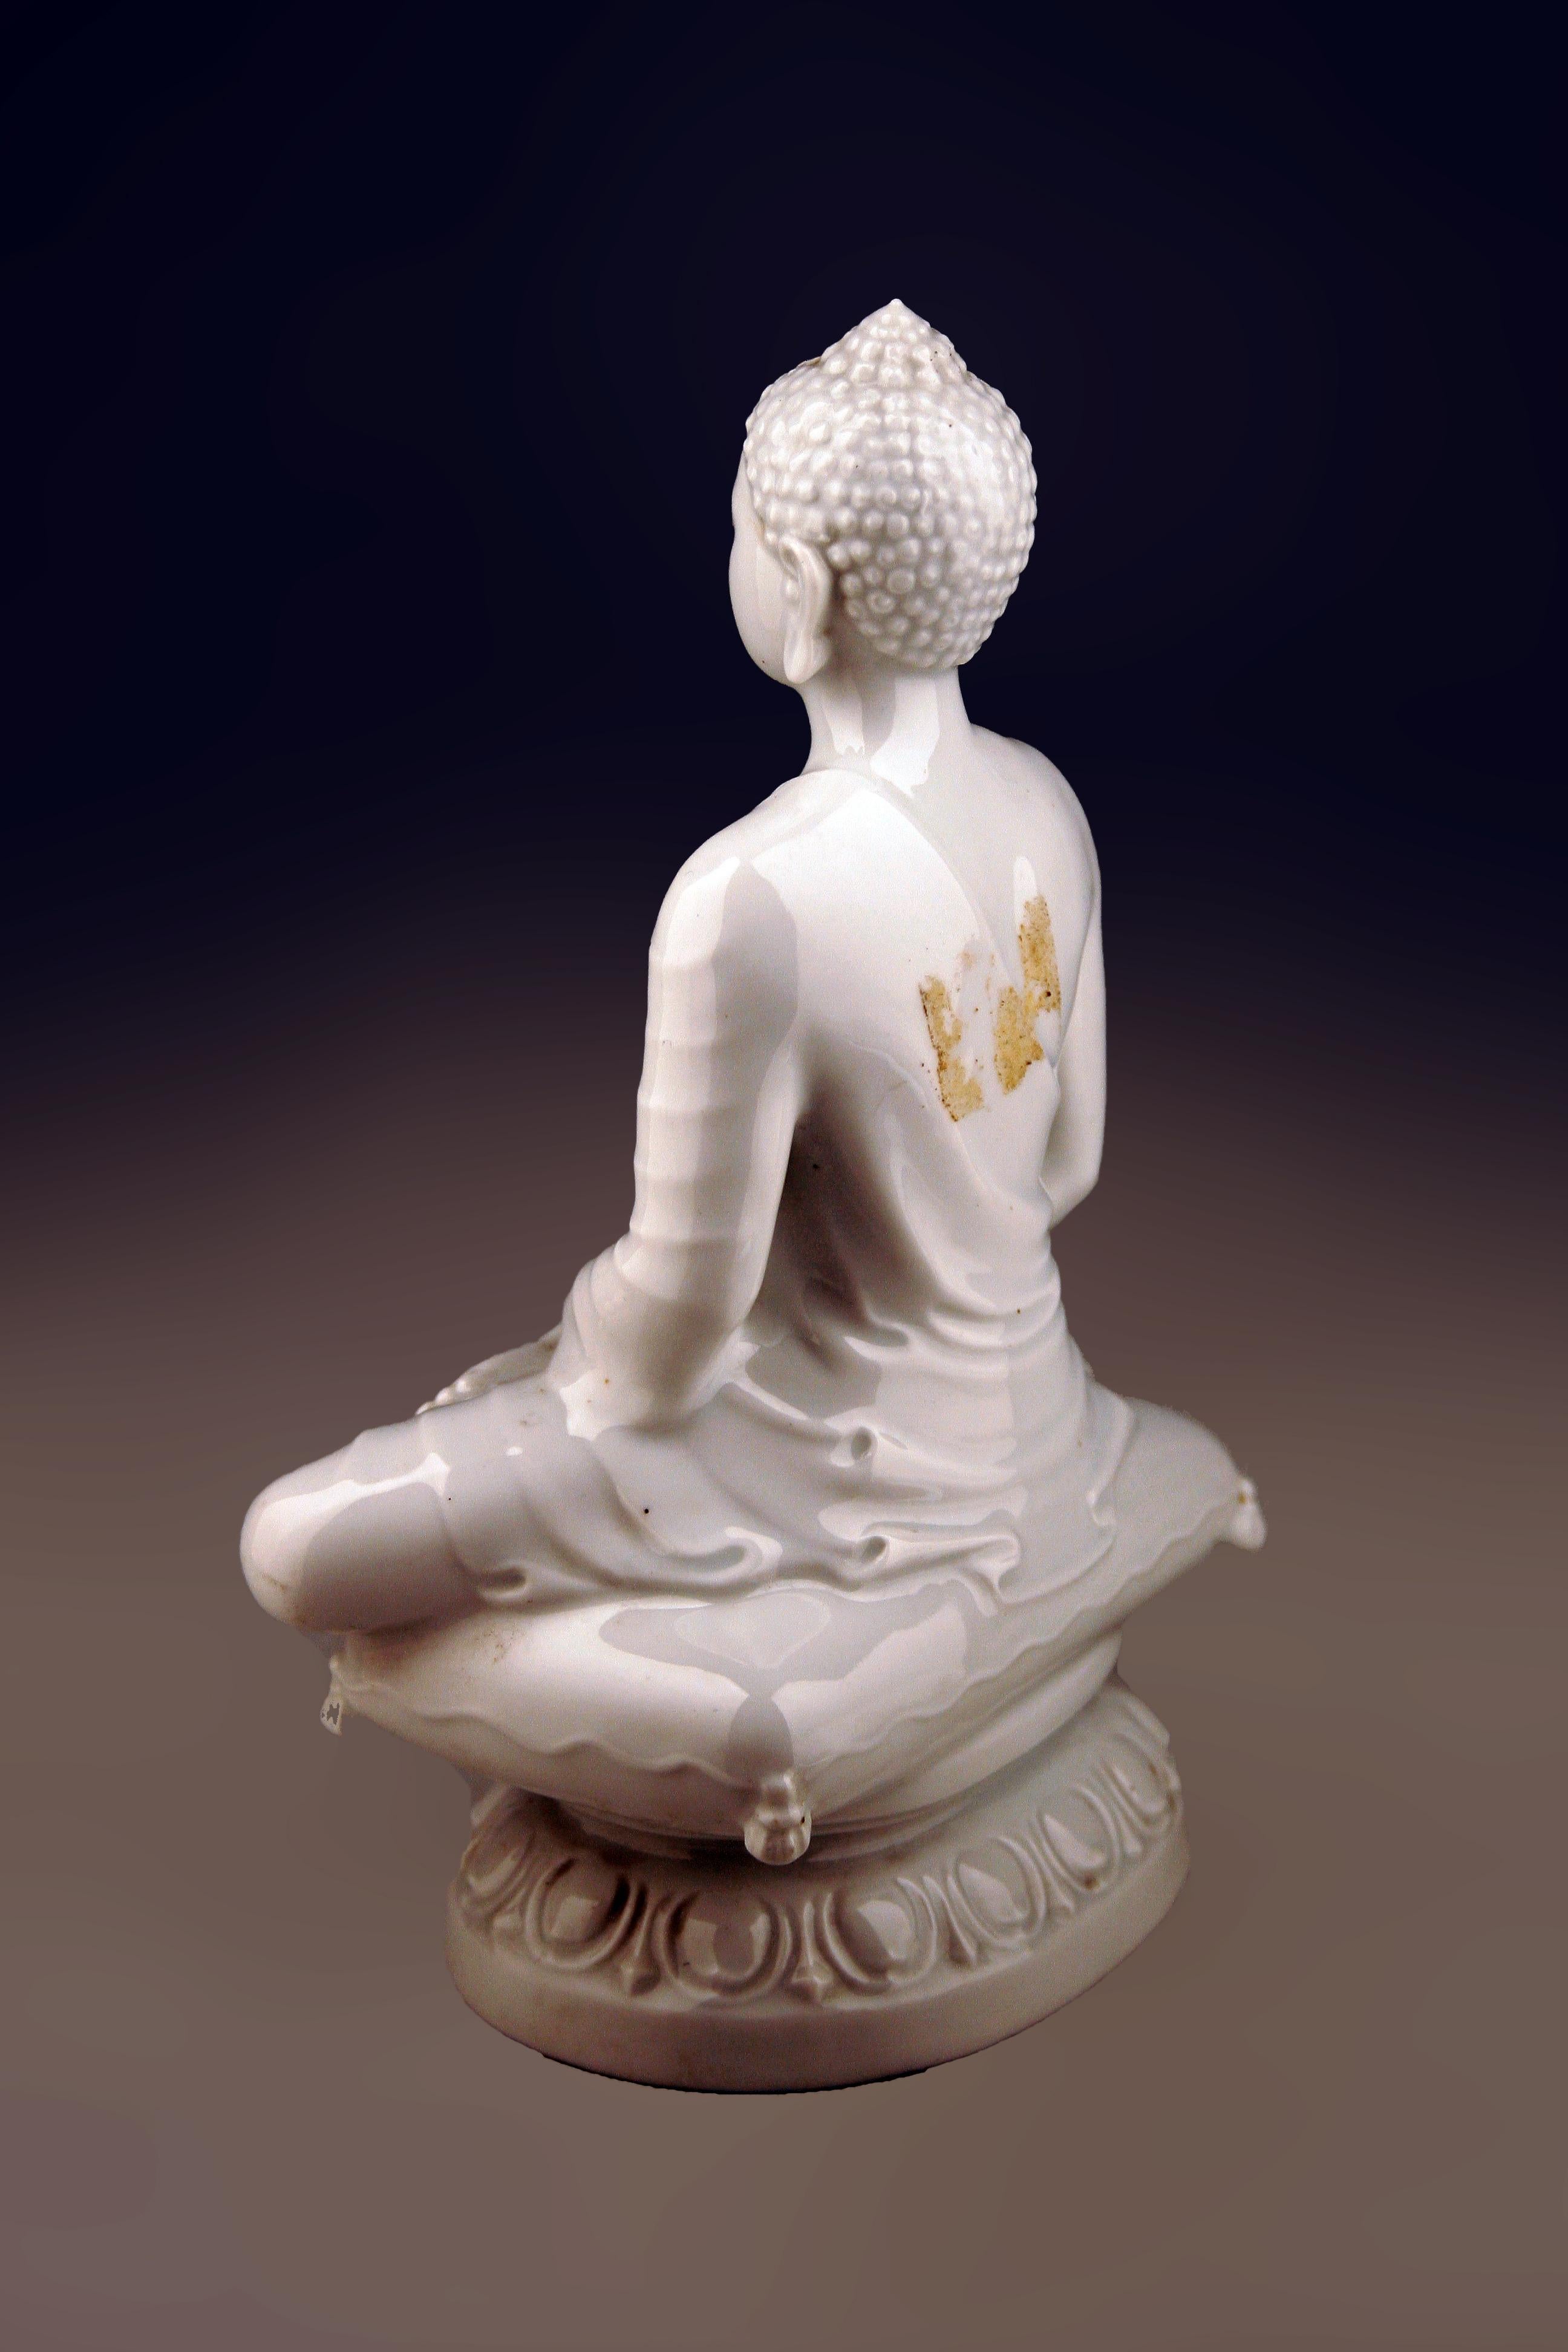 Enameled Art Déco German Glazed Porcelain Sculpture of a Sitting Buddha by Rosenthal For Sale